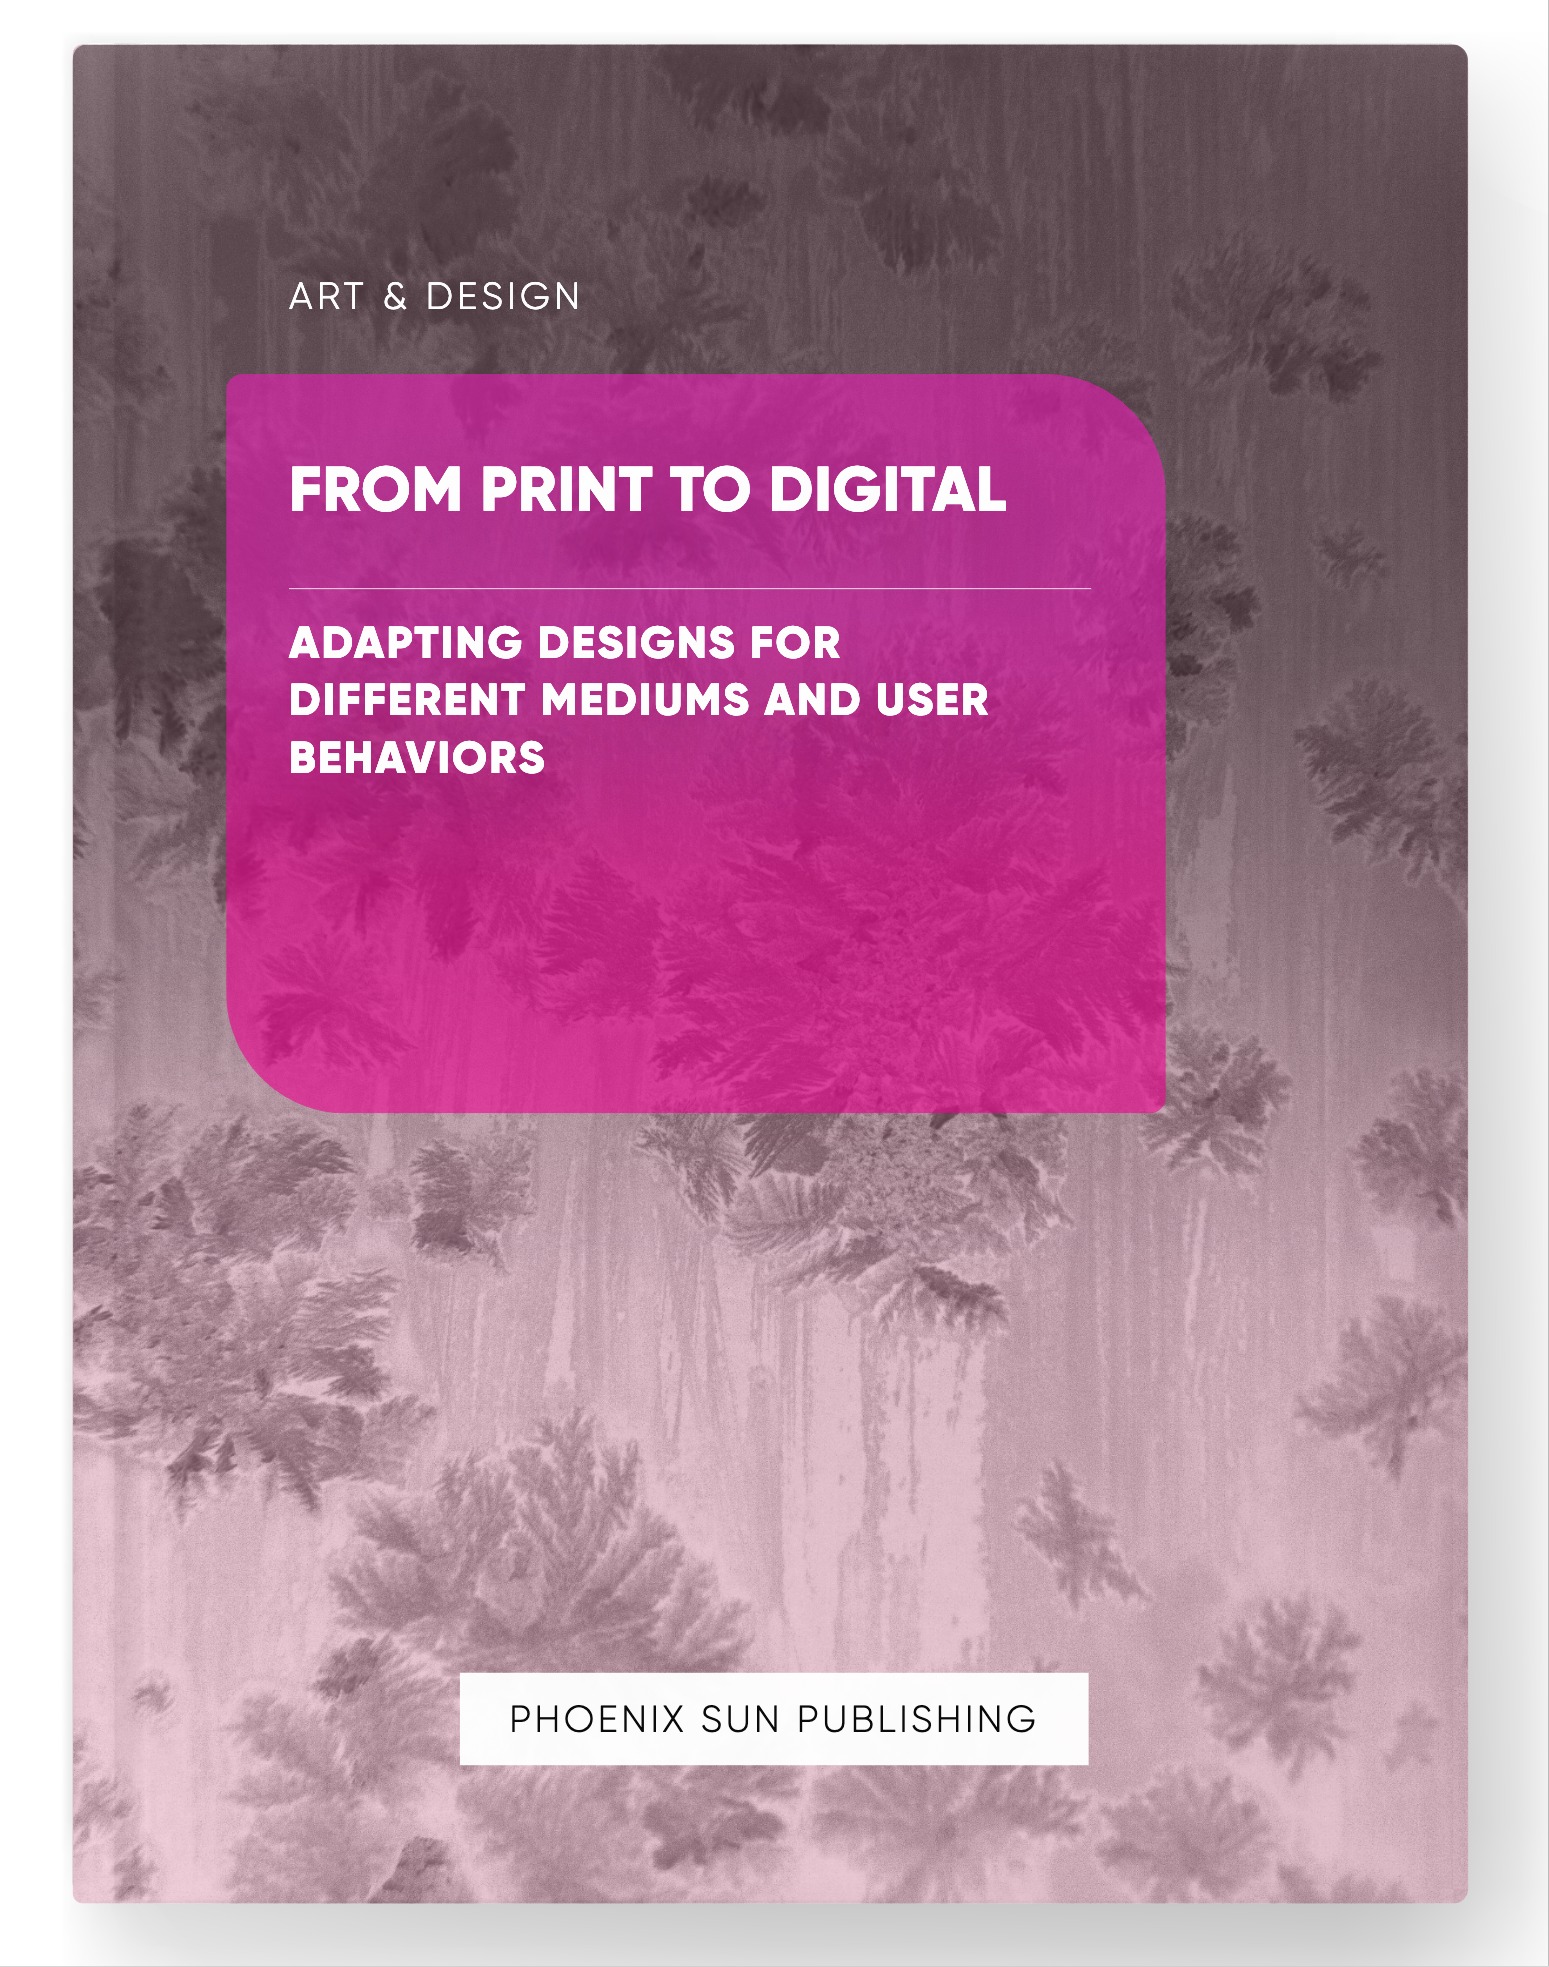 From Print to Digital – Adapting Designs for Different Mediums and User Behaviors